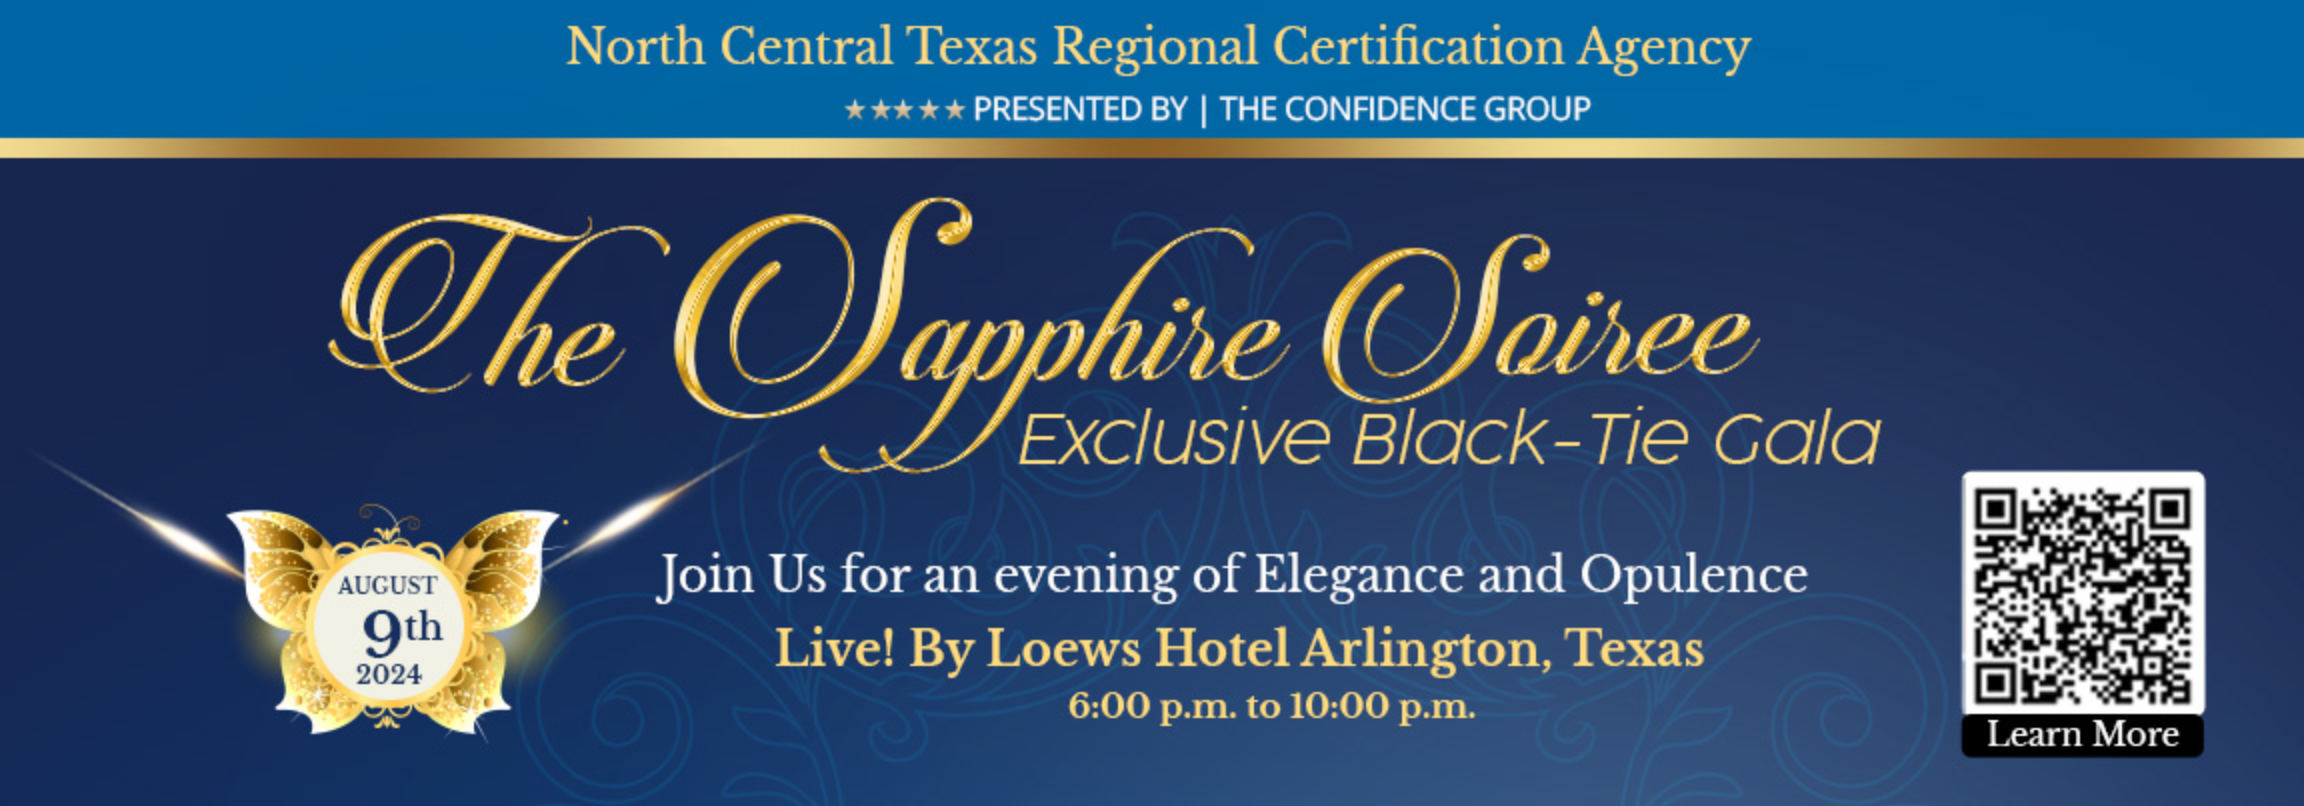 NCTRCA's Sapphire Soiree Gala by The Confidence Group